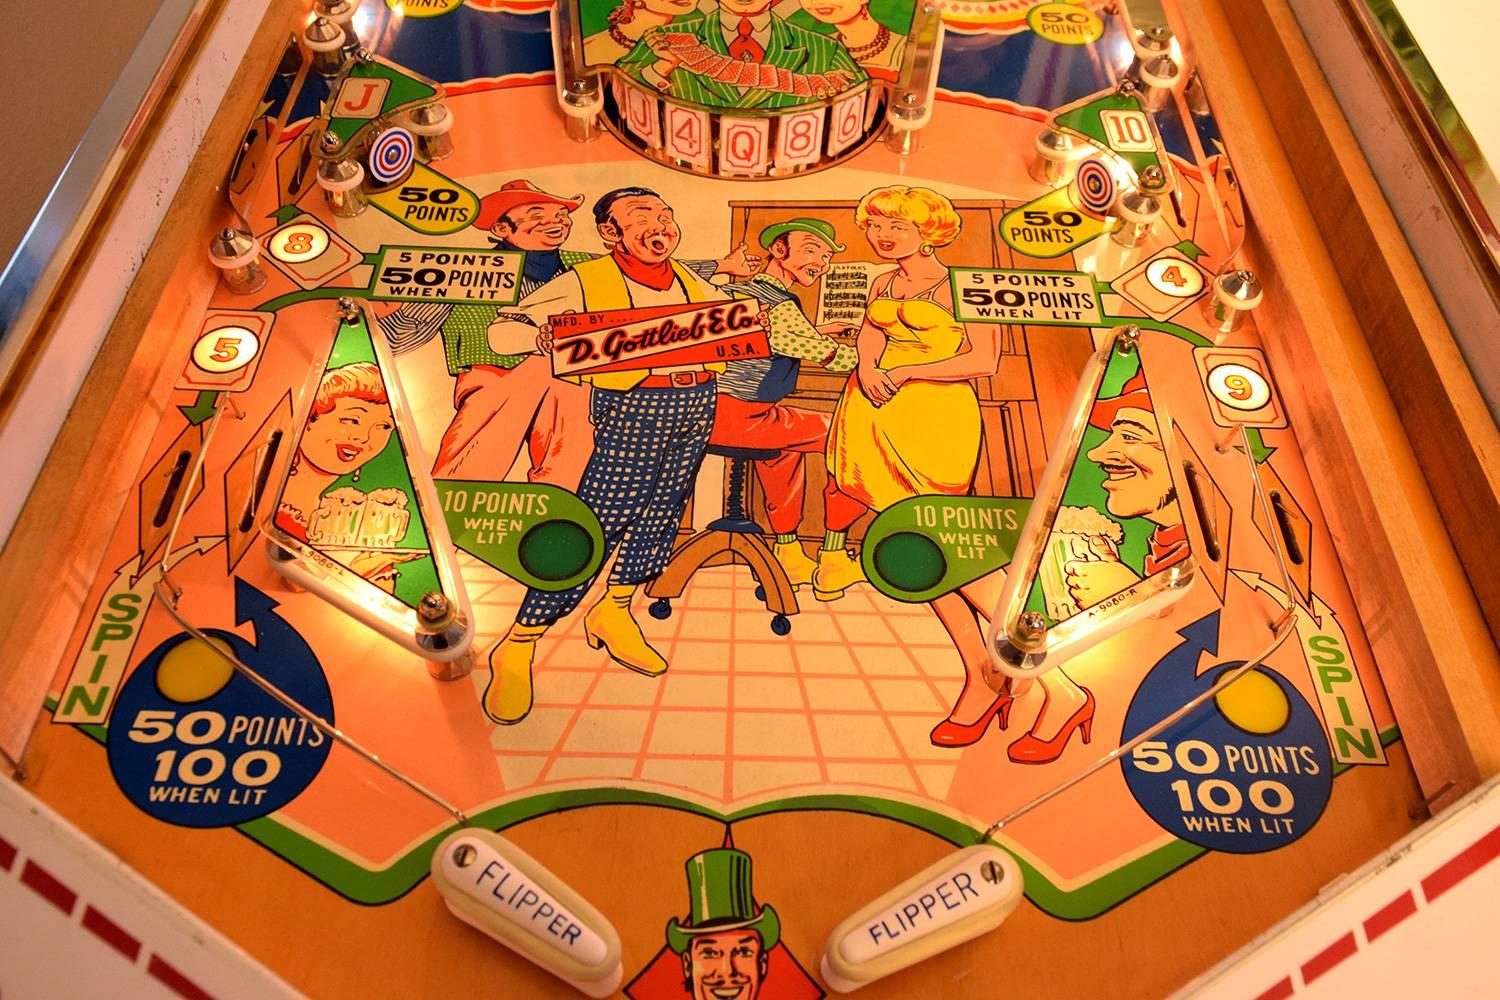 North American Gottlieb Hit-a-Card, Vintage Pinball Machine 1967, Fully Restored For Sale